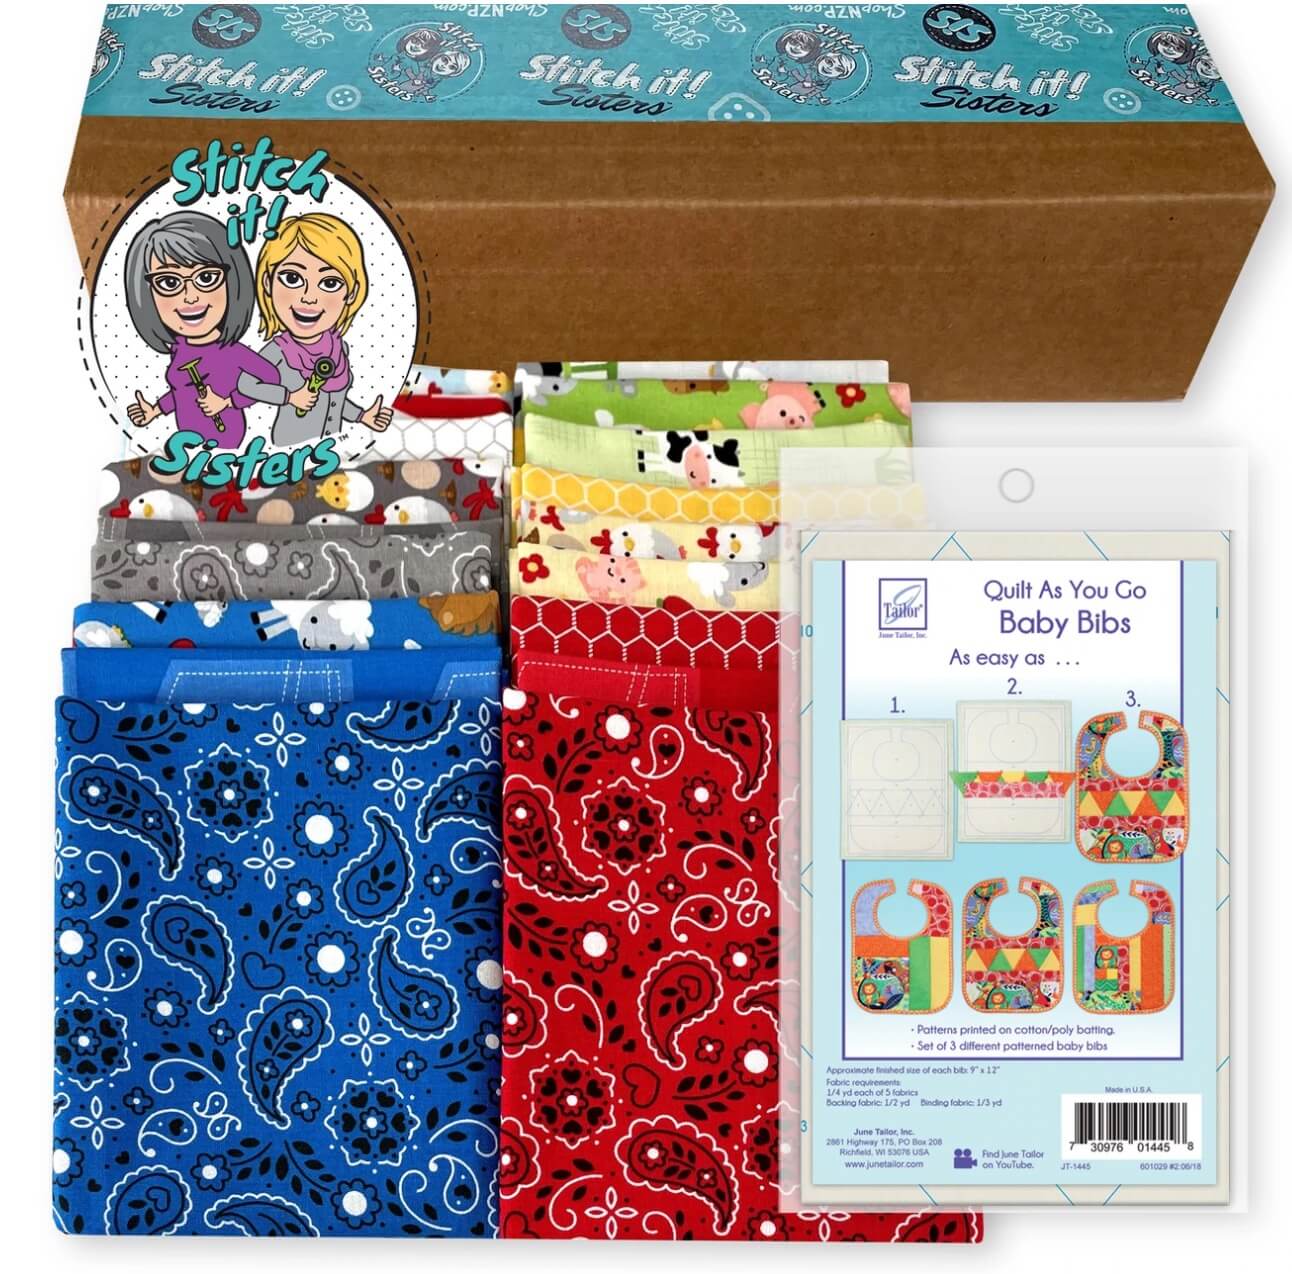 Quilt As You Go Baby Bibs Bundle Box available at Nancy Zieman Productions at ShopNZP.com